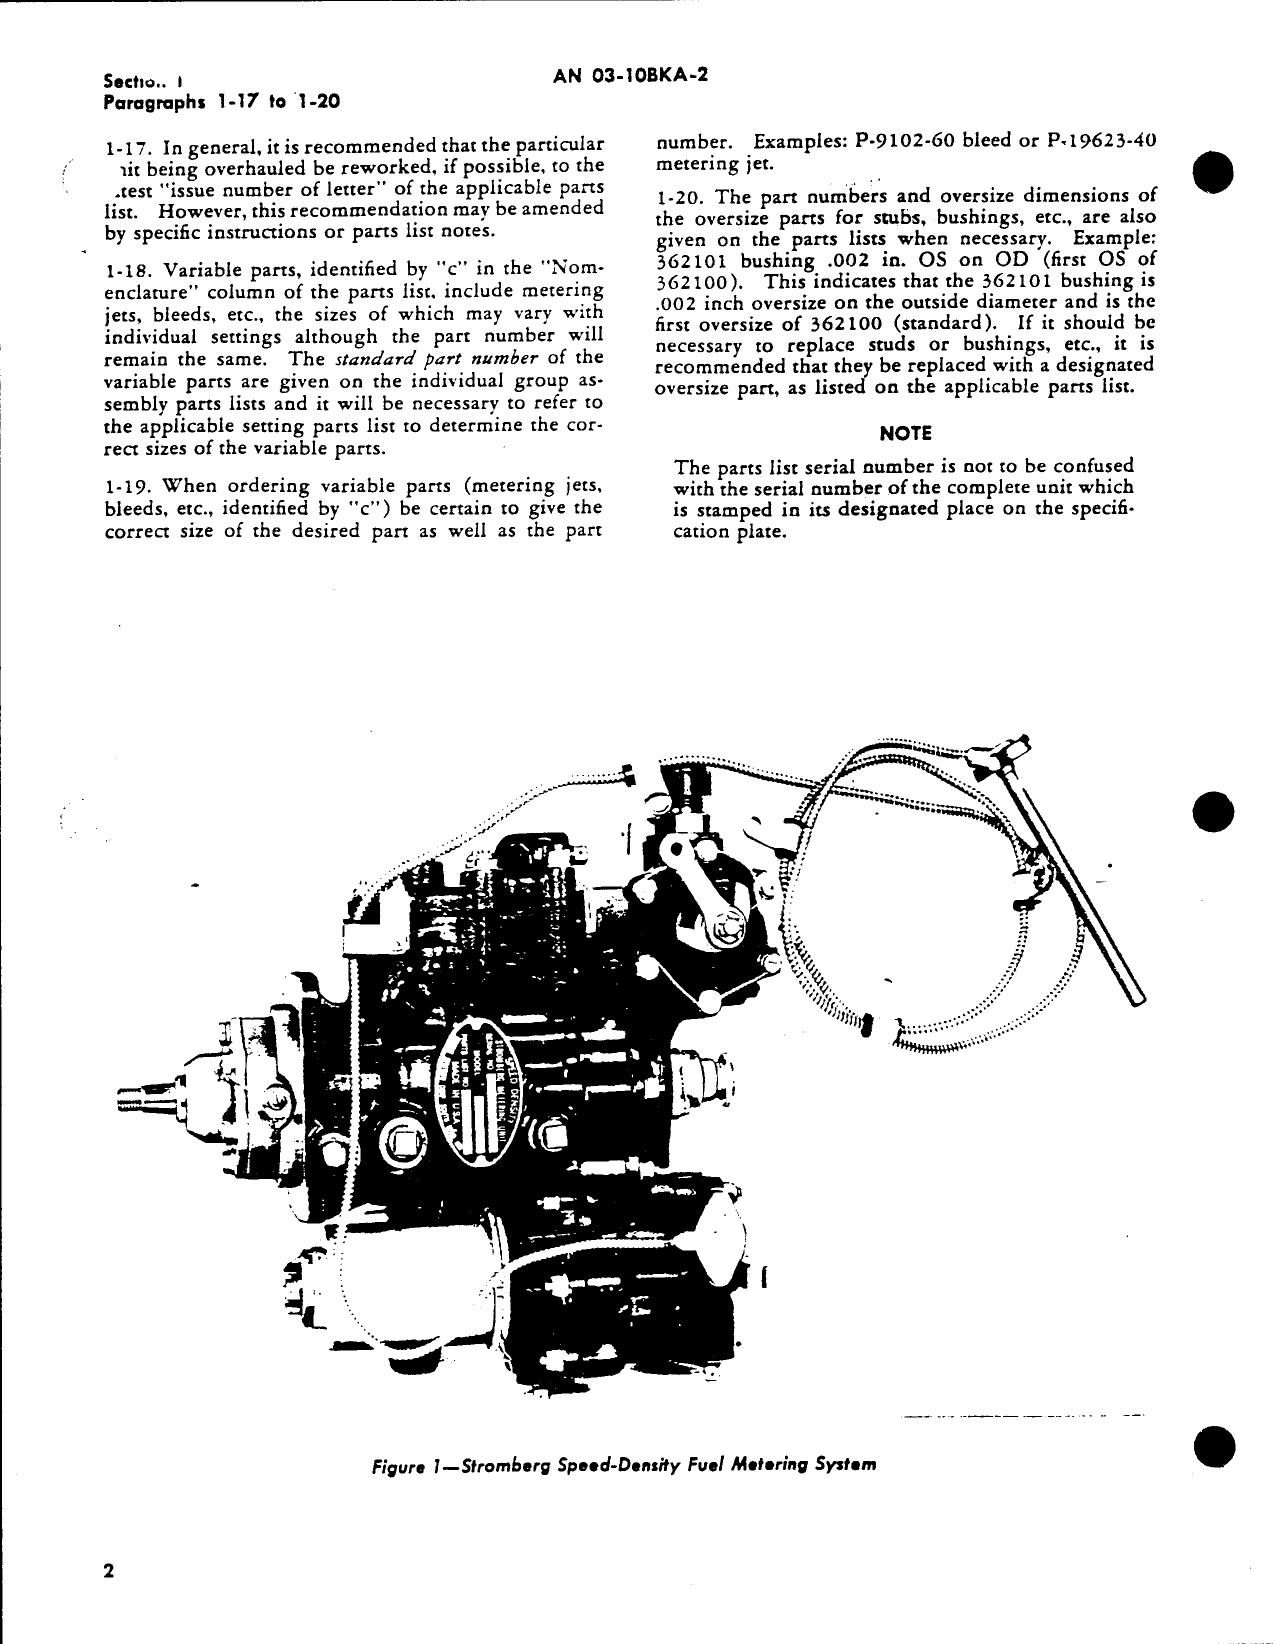 Sample page 4 from AirCorps Library document: Parts Catalog for Speed-Density Fuel Metering System (Bendix)